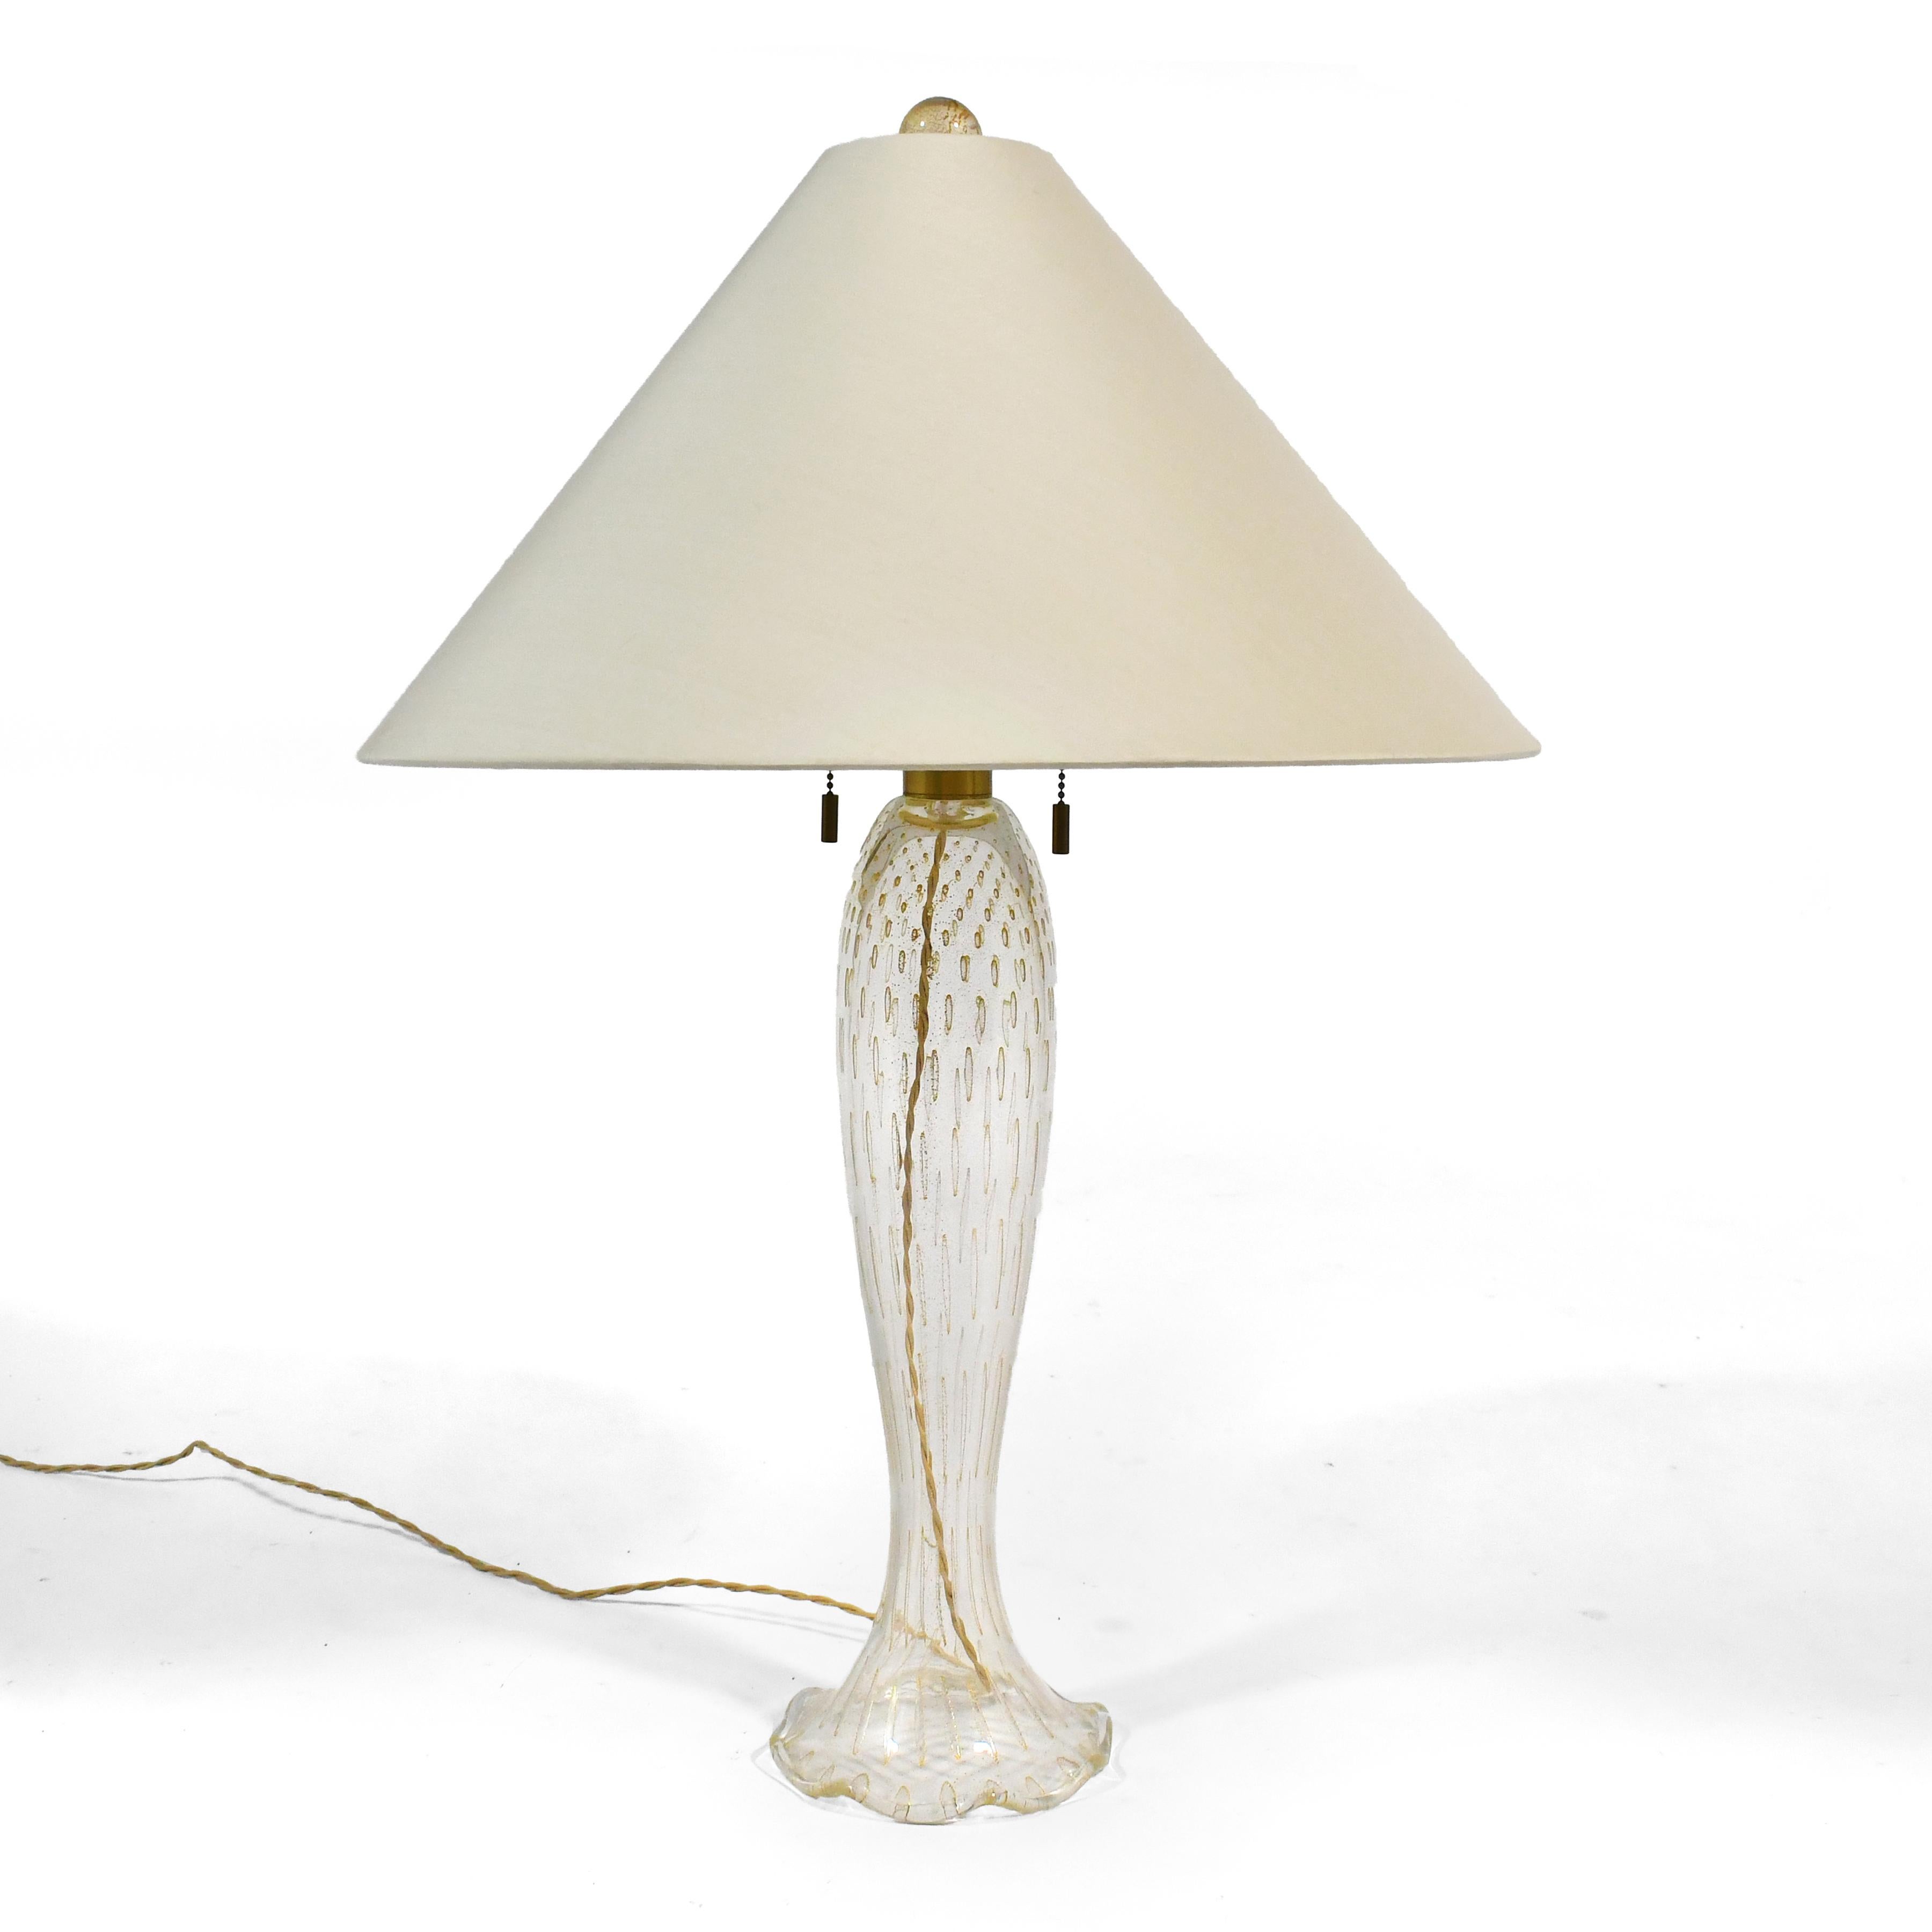 This rare and striking lamp designed by John Hutton for Dongia was made with Seguso Murano glass using the Cordonato D'Oro technique with its clear glass decorated with captured bubbles, gold dust and gold aventurine. It has premium quality hardware